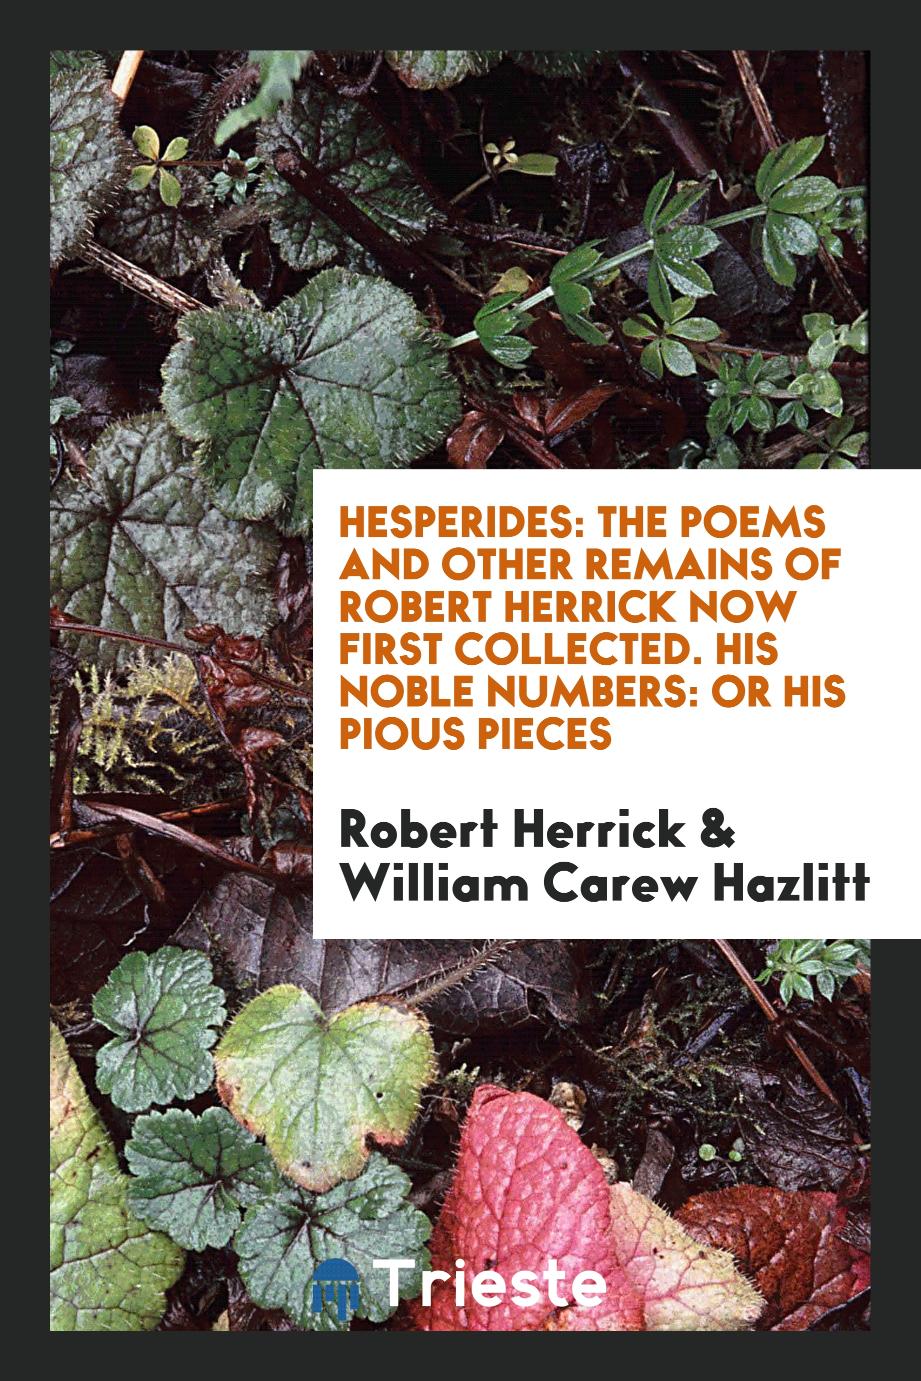 Hesperides: the poems and other remains of Robert Herrick now first collected. His noble numbers: or his pious pieces